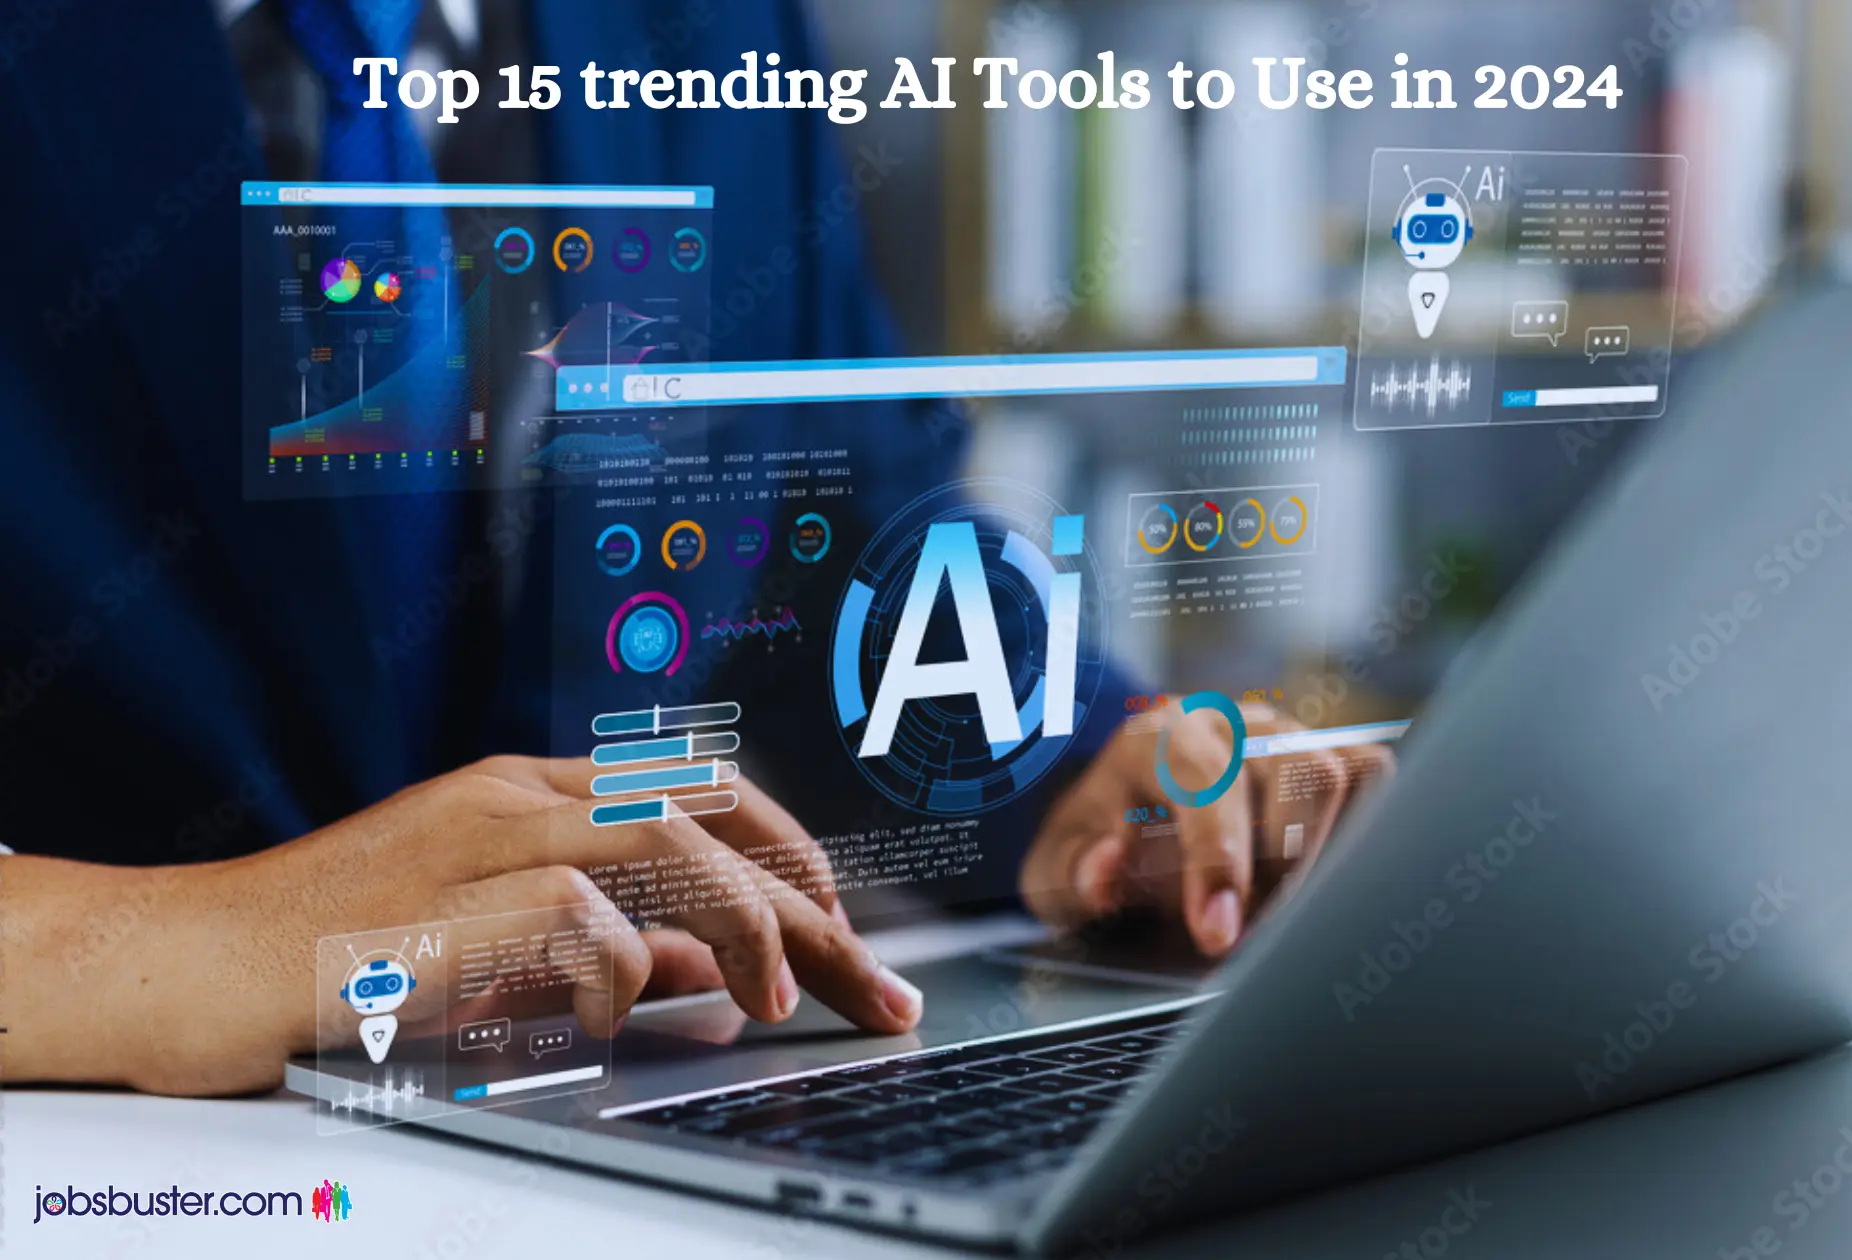 Top 15 trending AI Tools to Use in 2024